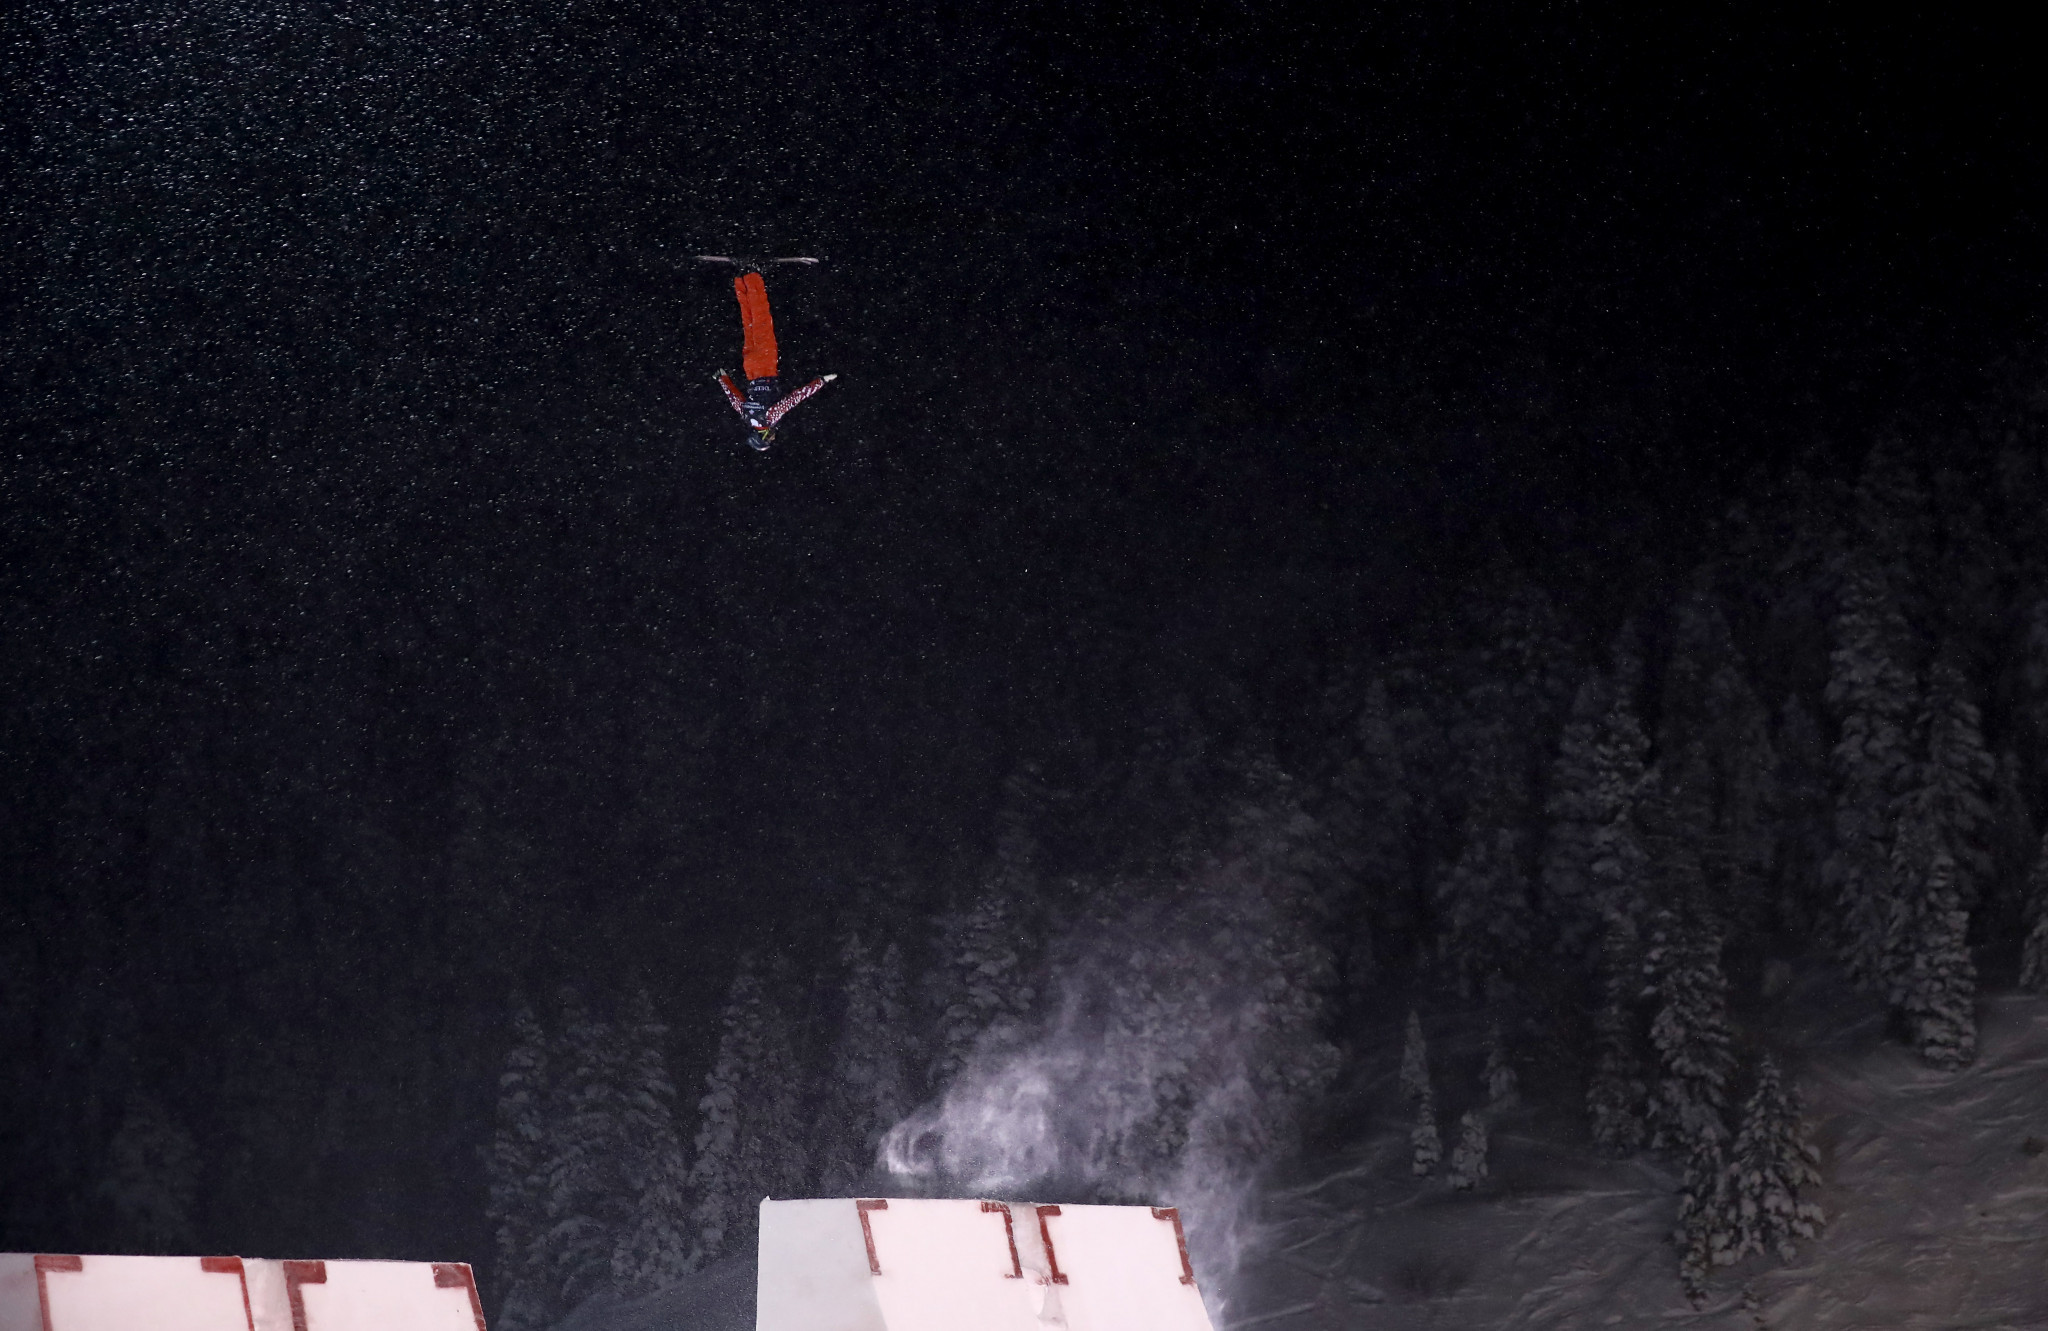 Burov seals hat-trick of Freestyle Aerials World Cup wins in Ruka